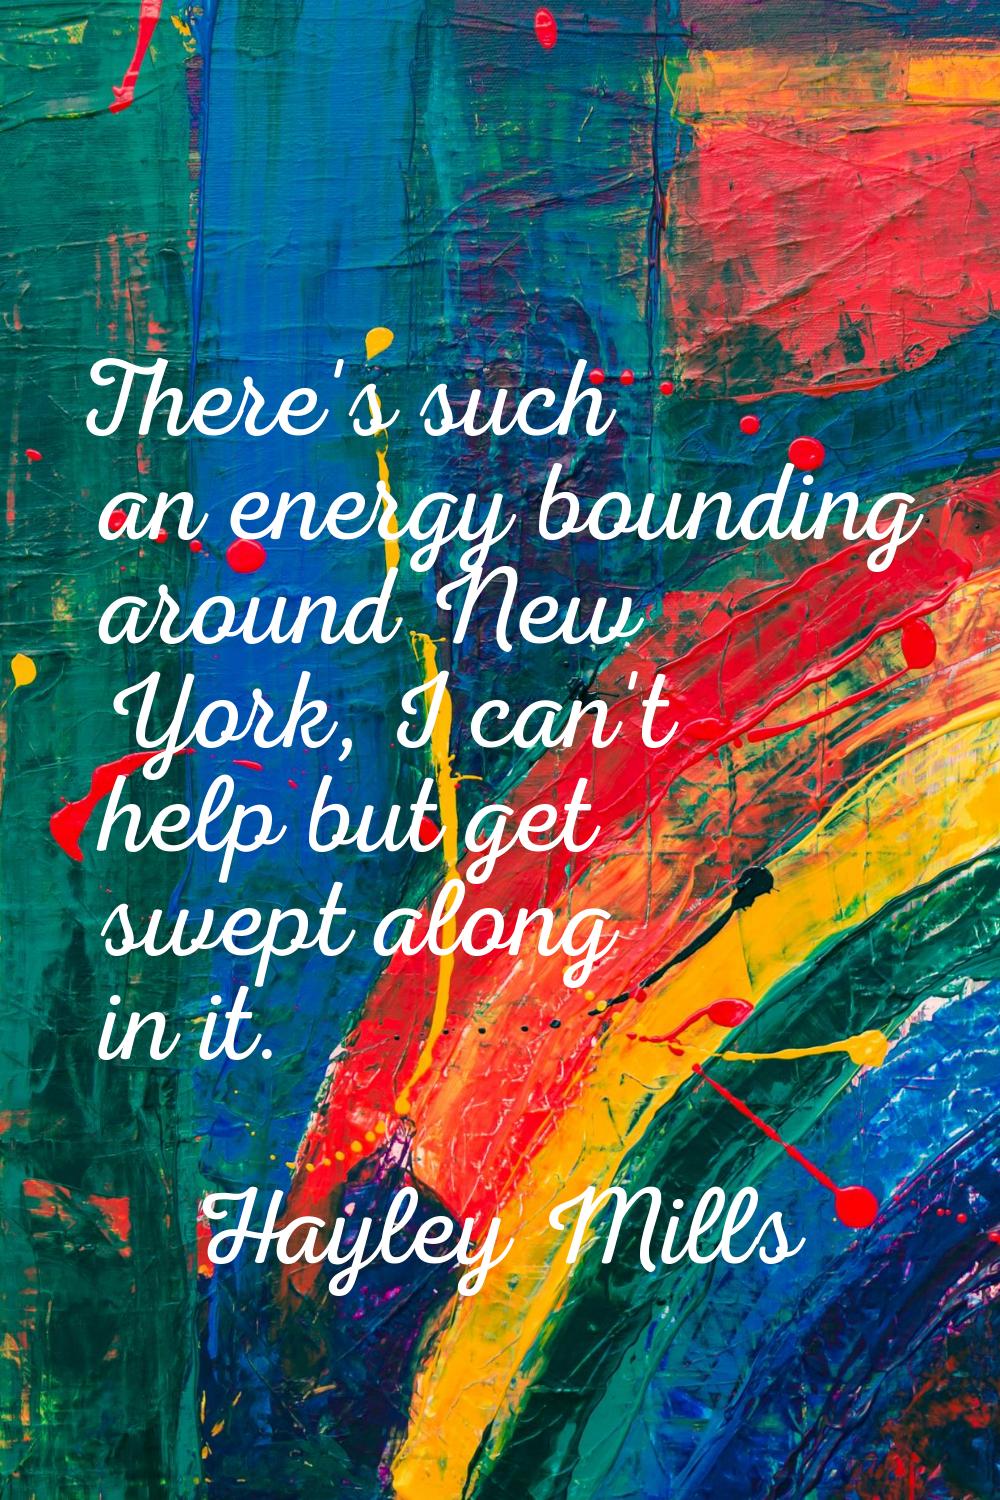 There's such an energy bounding around New York, I can't help but get swept along in it.